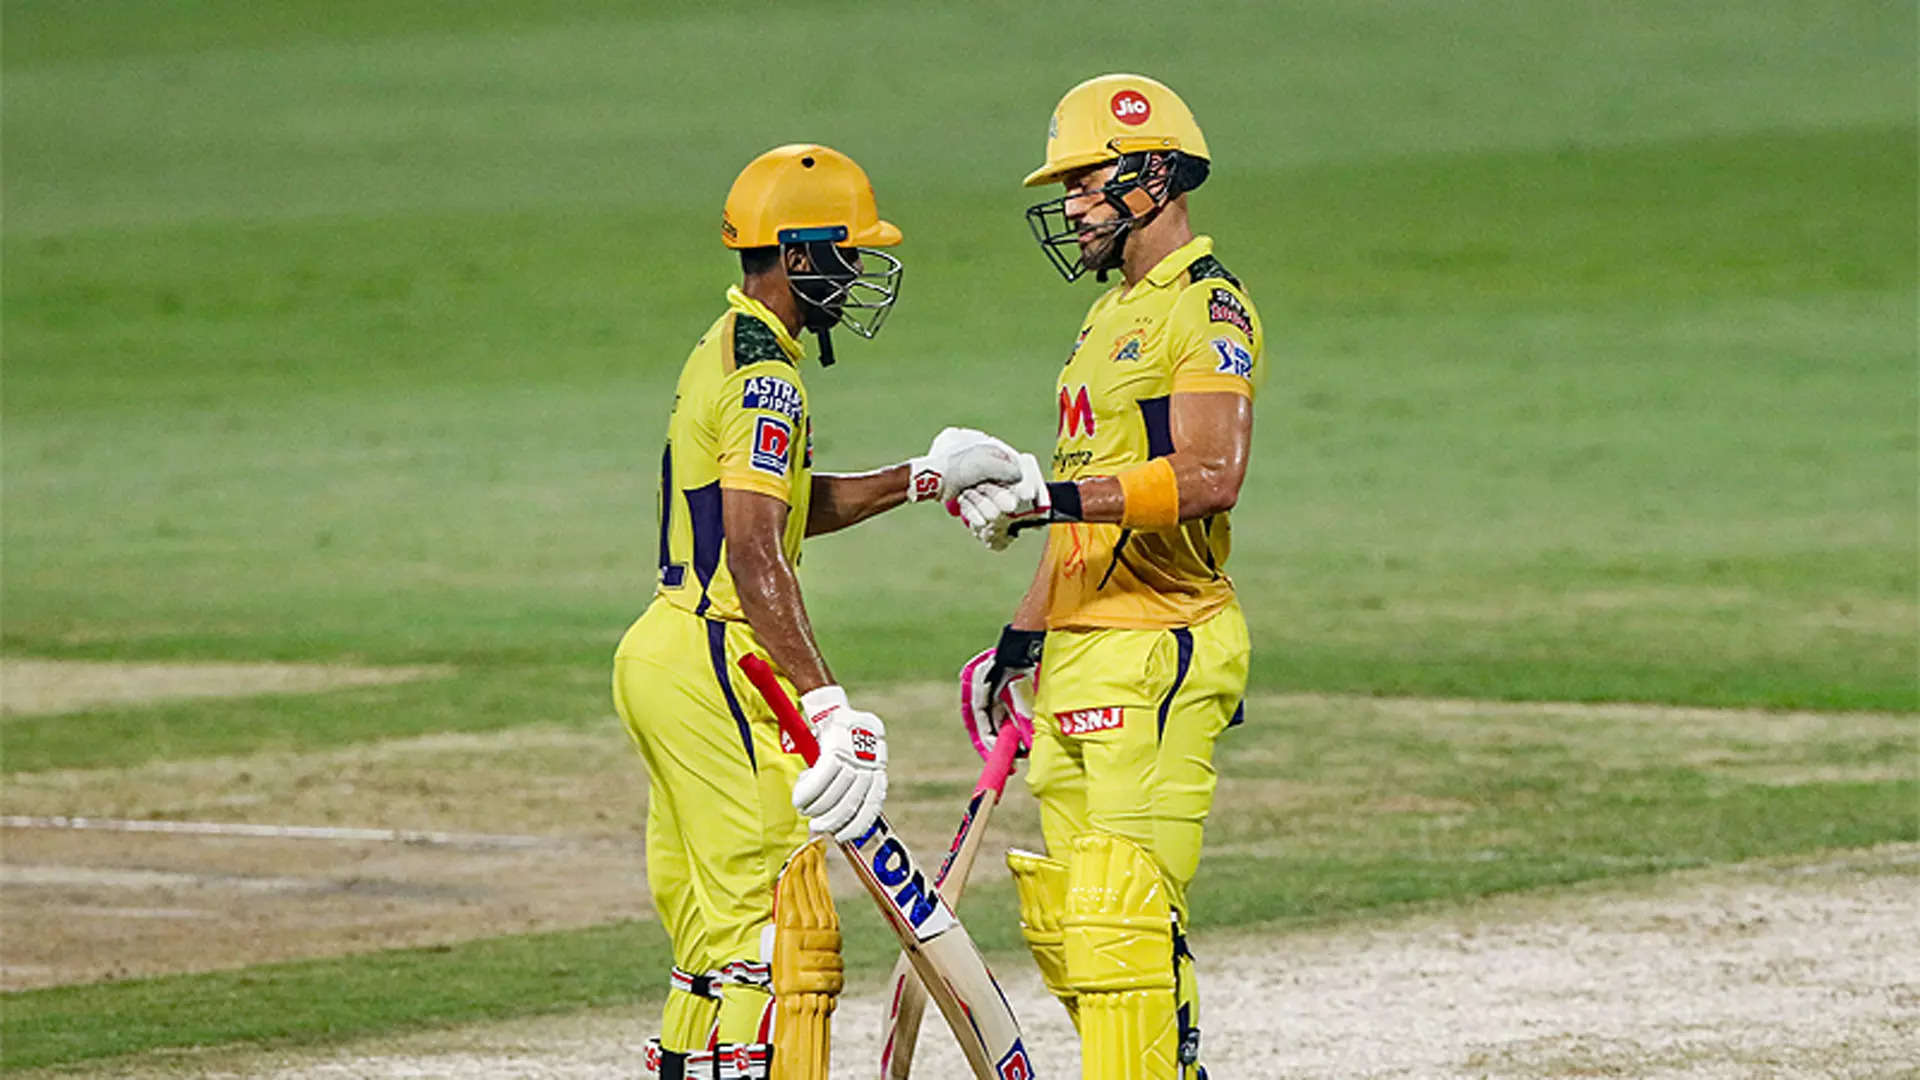 IN PICS: How CSK beat SRH to become first side to book a playoff berth